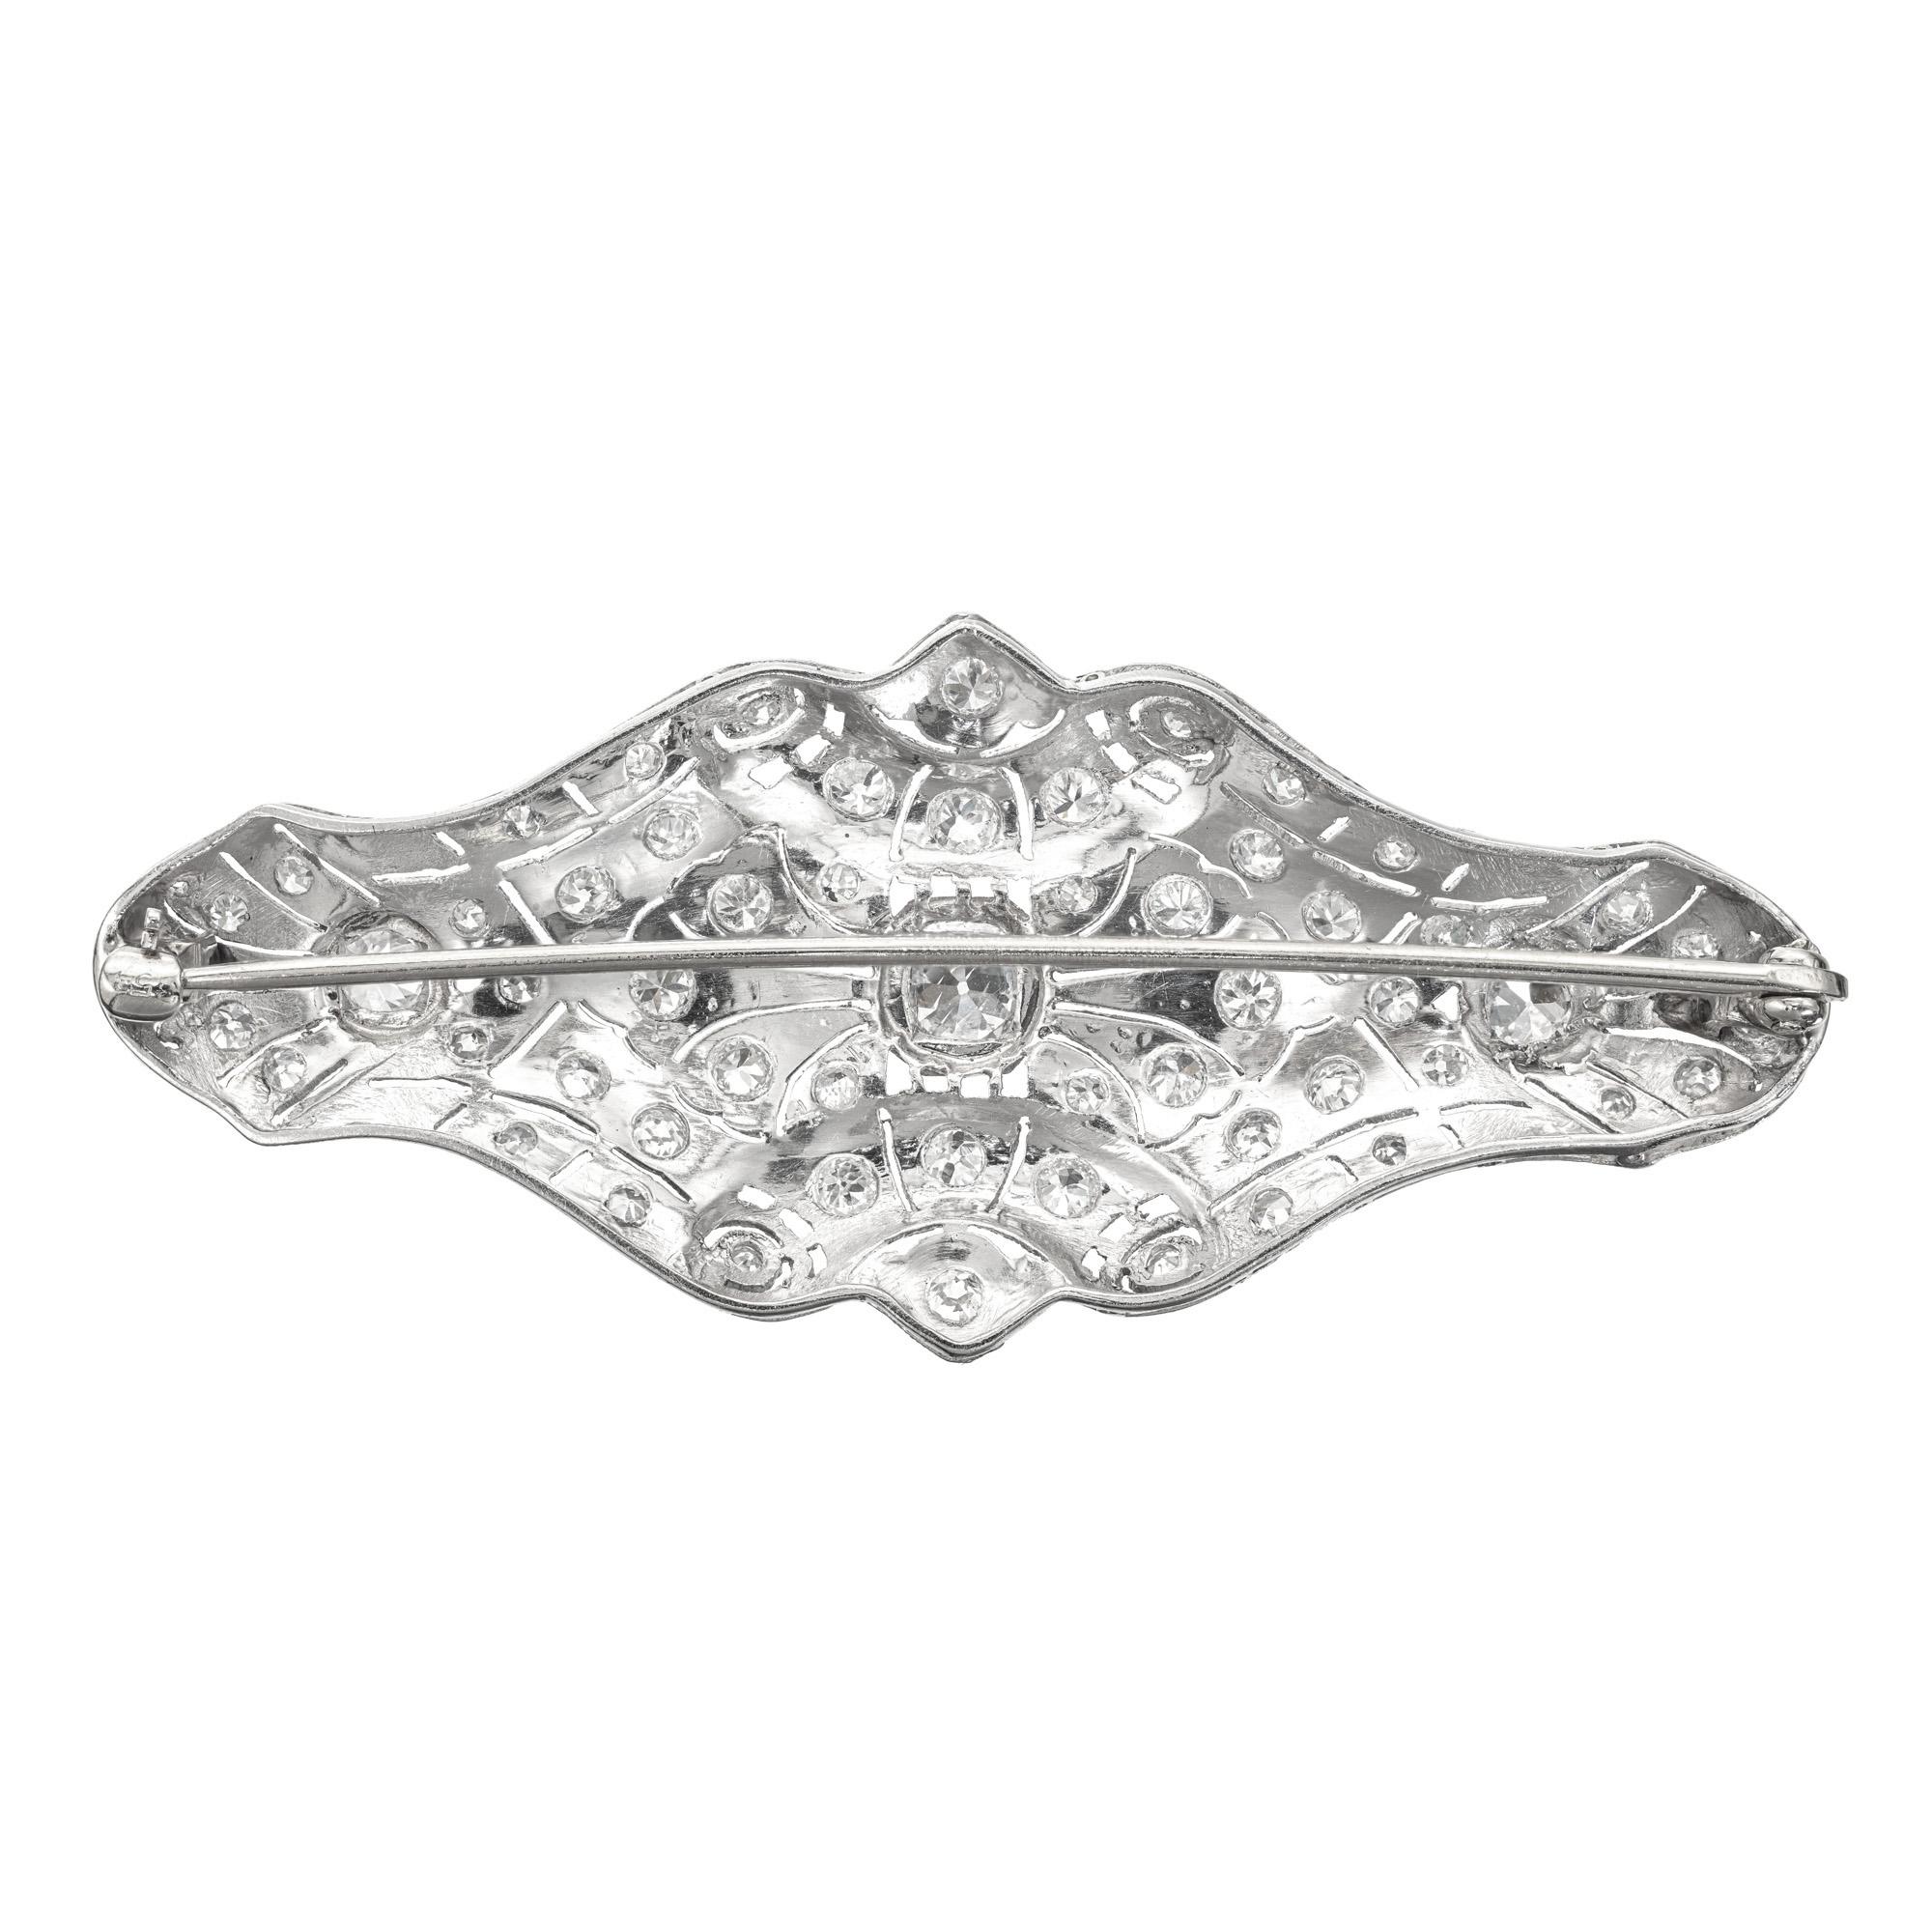 2.48 Carat Old European Diamond Art Deco Domed Platinum  Brooch In Good Condition For Sale In Stamford, CT